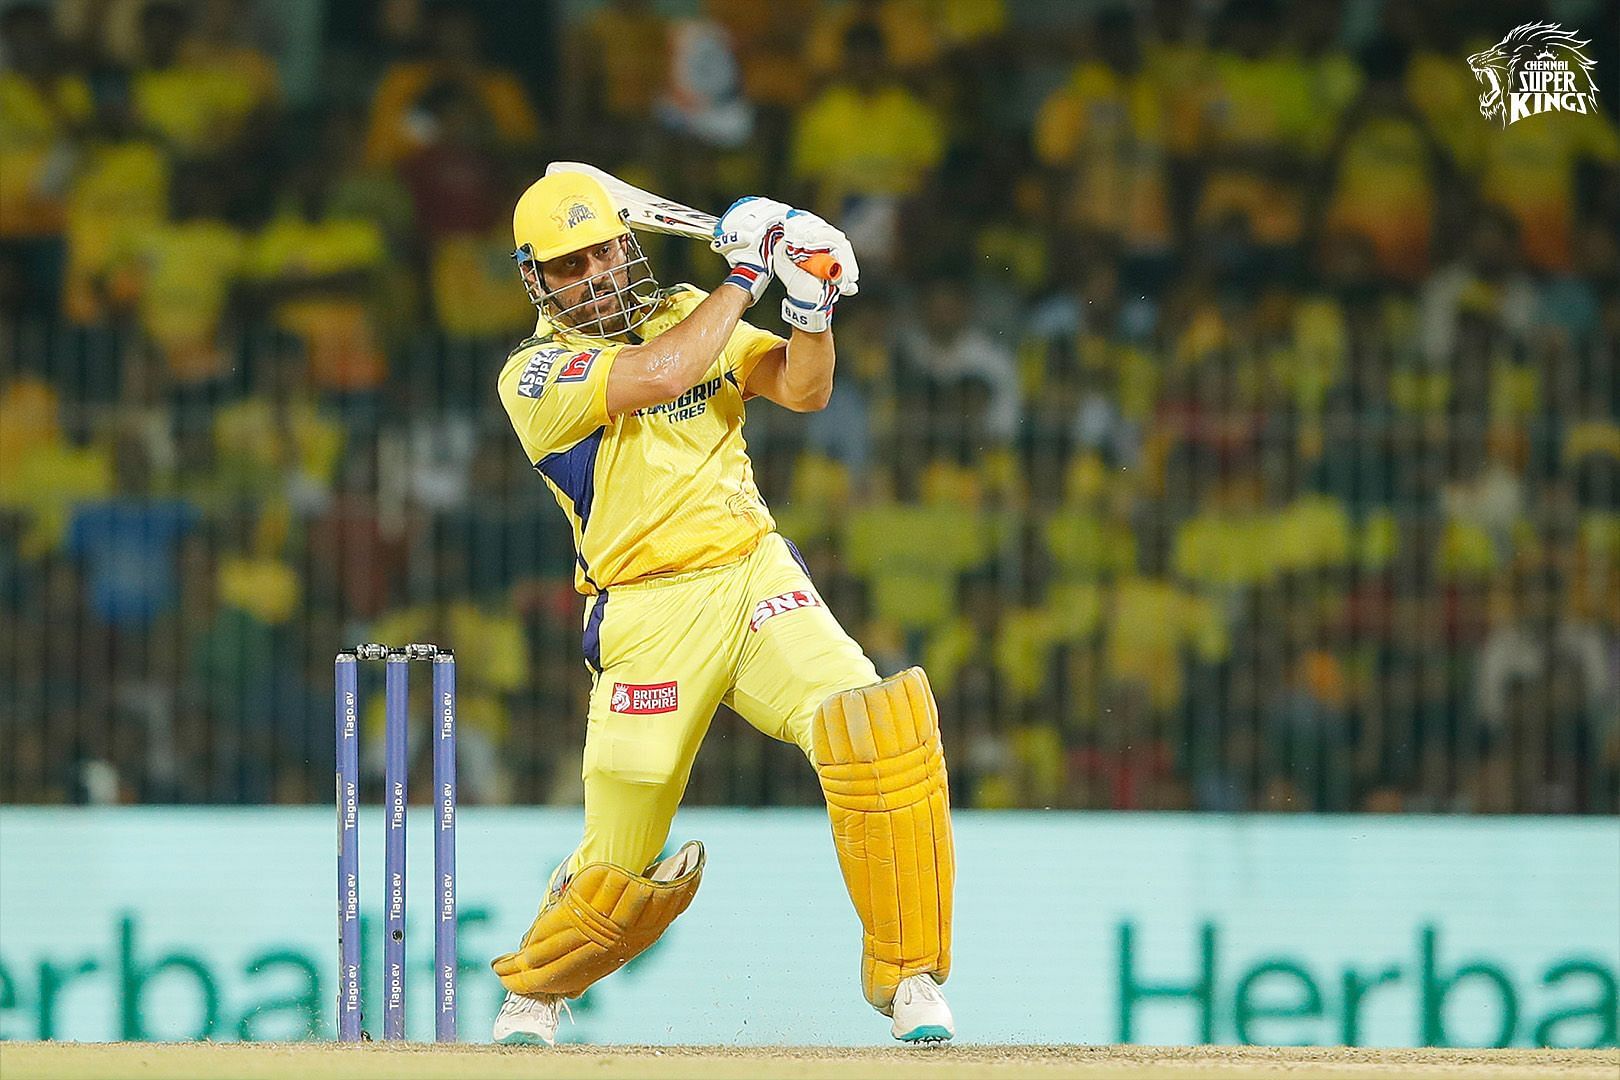 Dhoni, in his 200th IPL game as CSK captain, almost did the unthinkable [Credits: CSK]